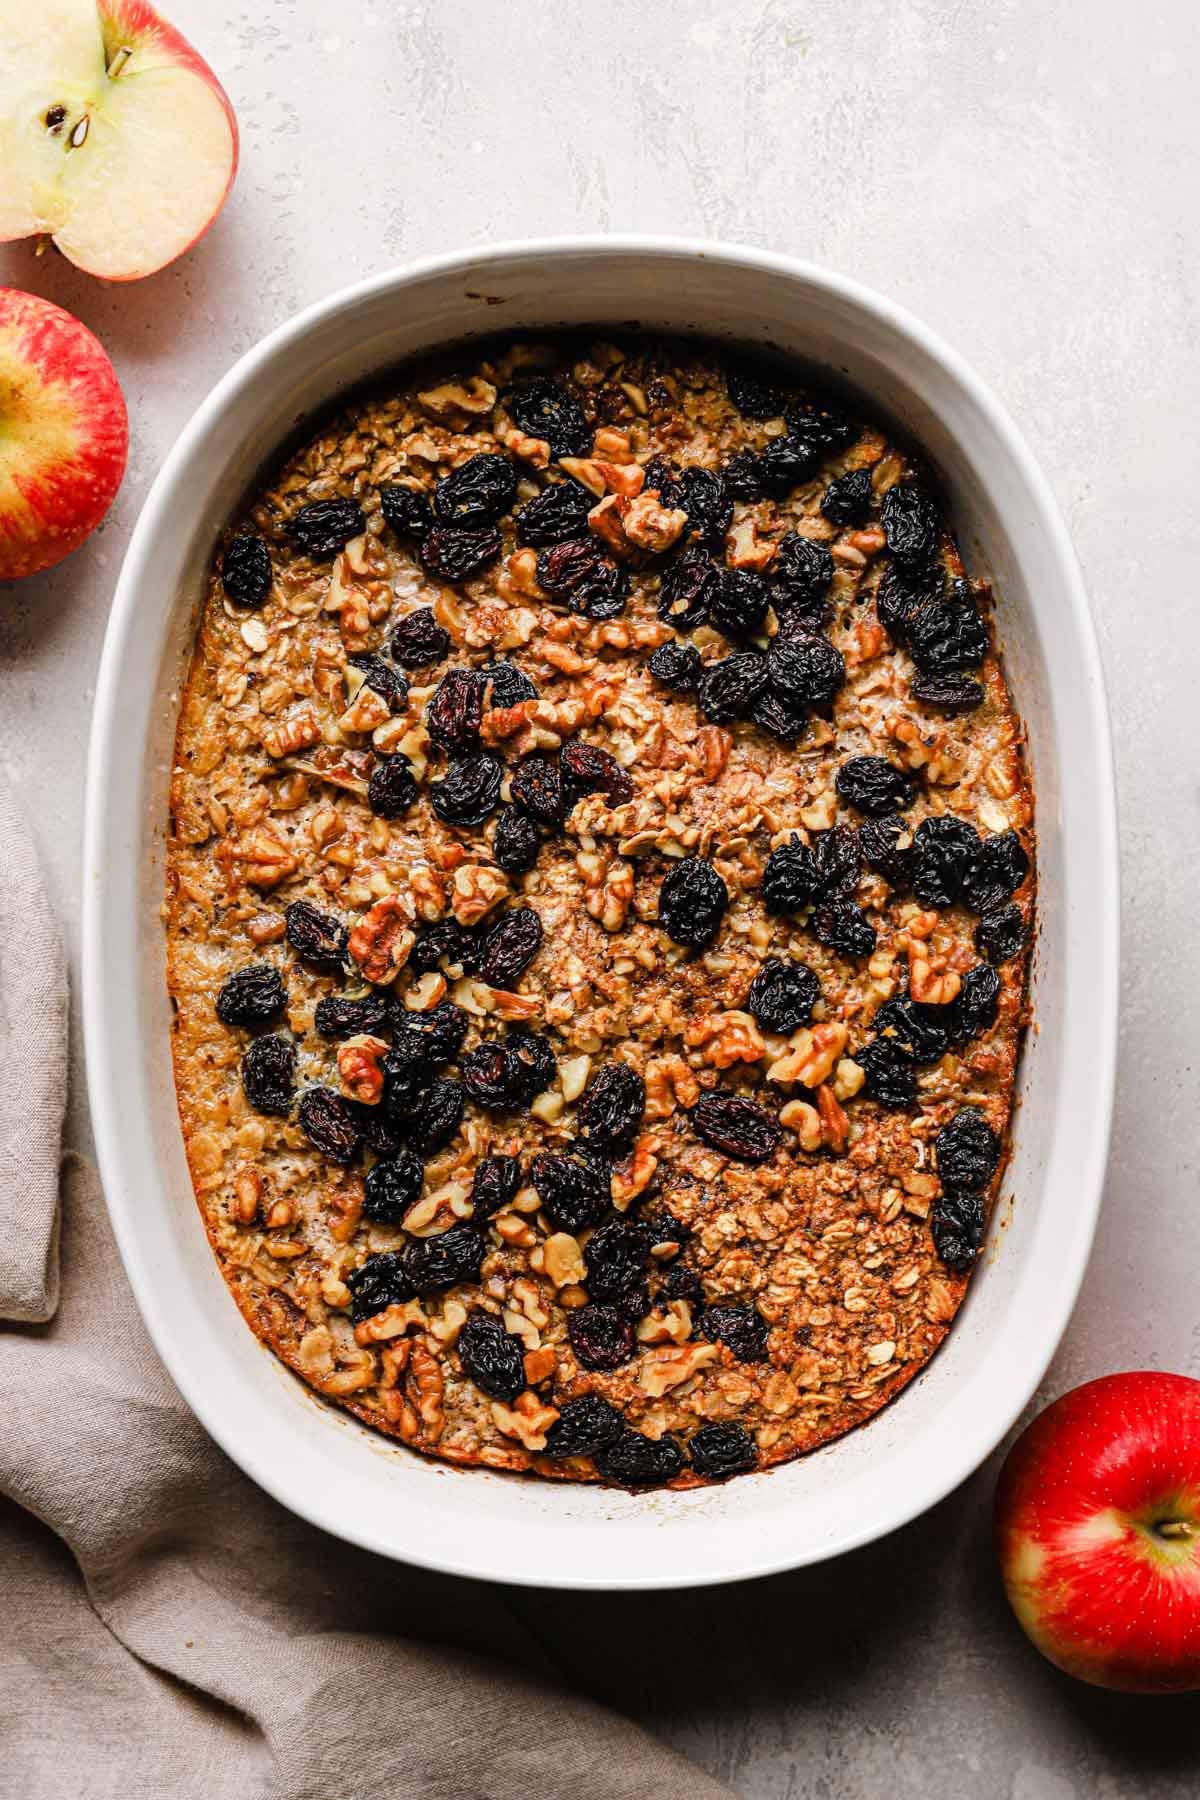 Healthy baked oatmeal in a white oval baking dish with apples, raisins and walnuts.